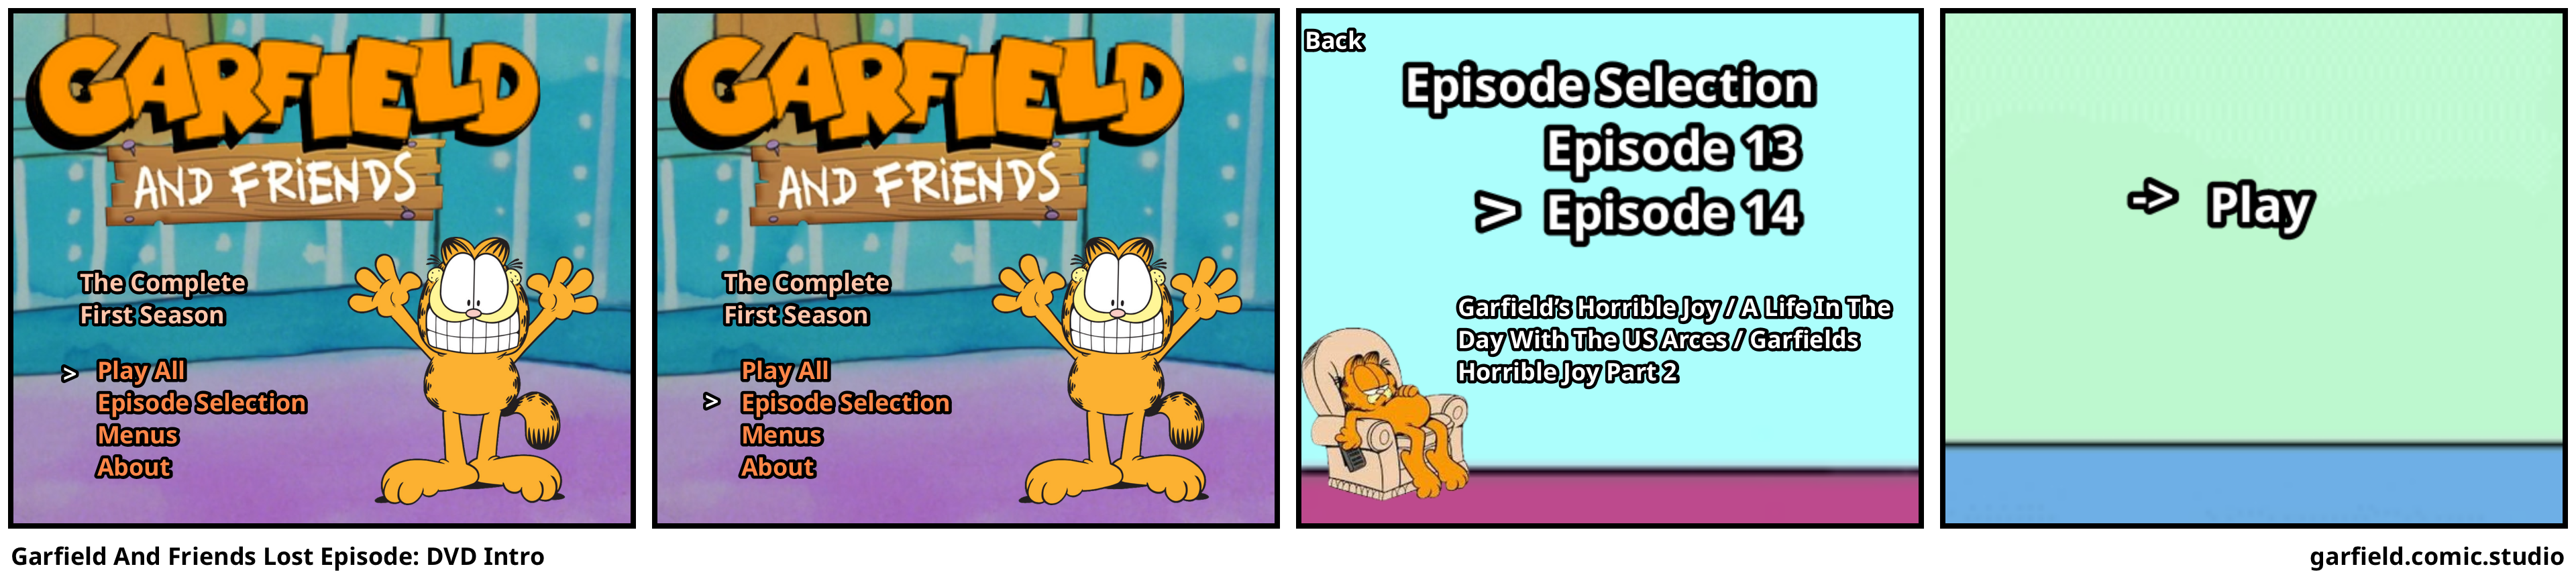 Garfield And Friends Lost Episode: DVD Intro